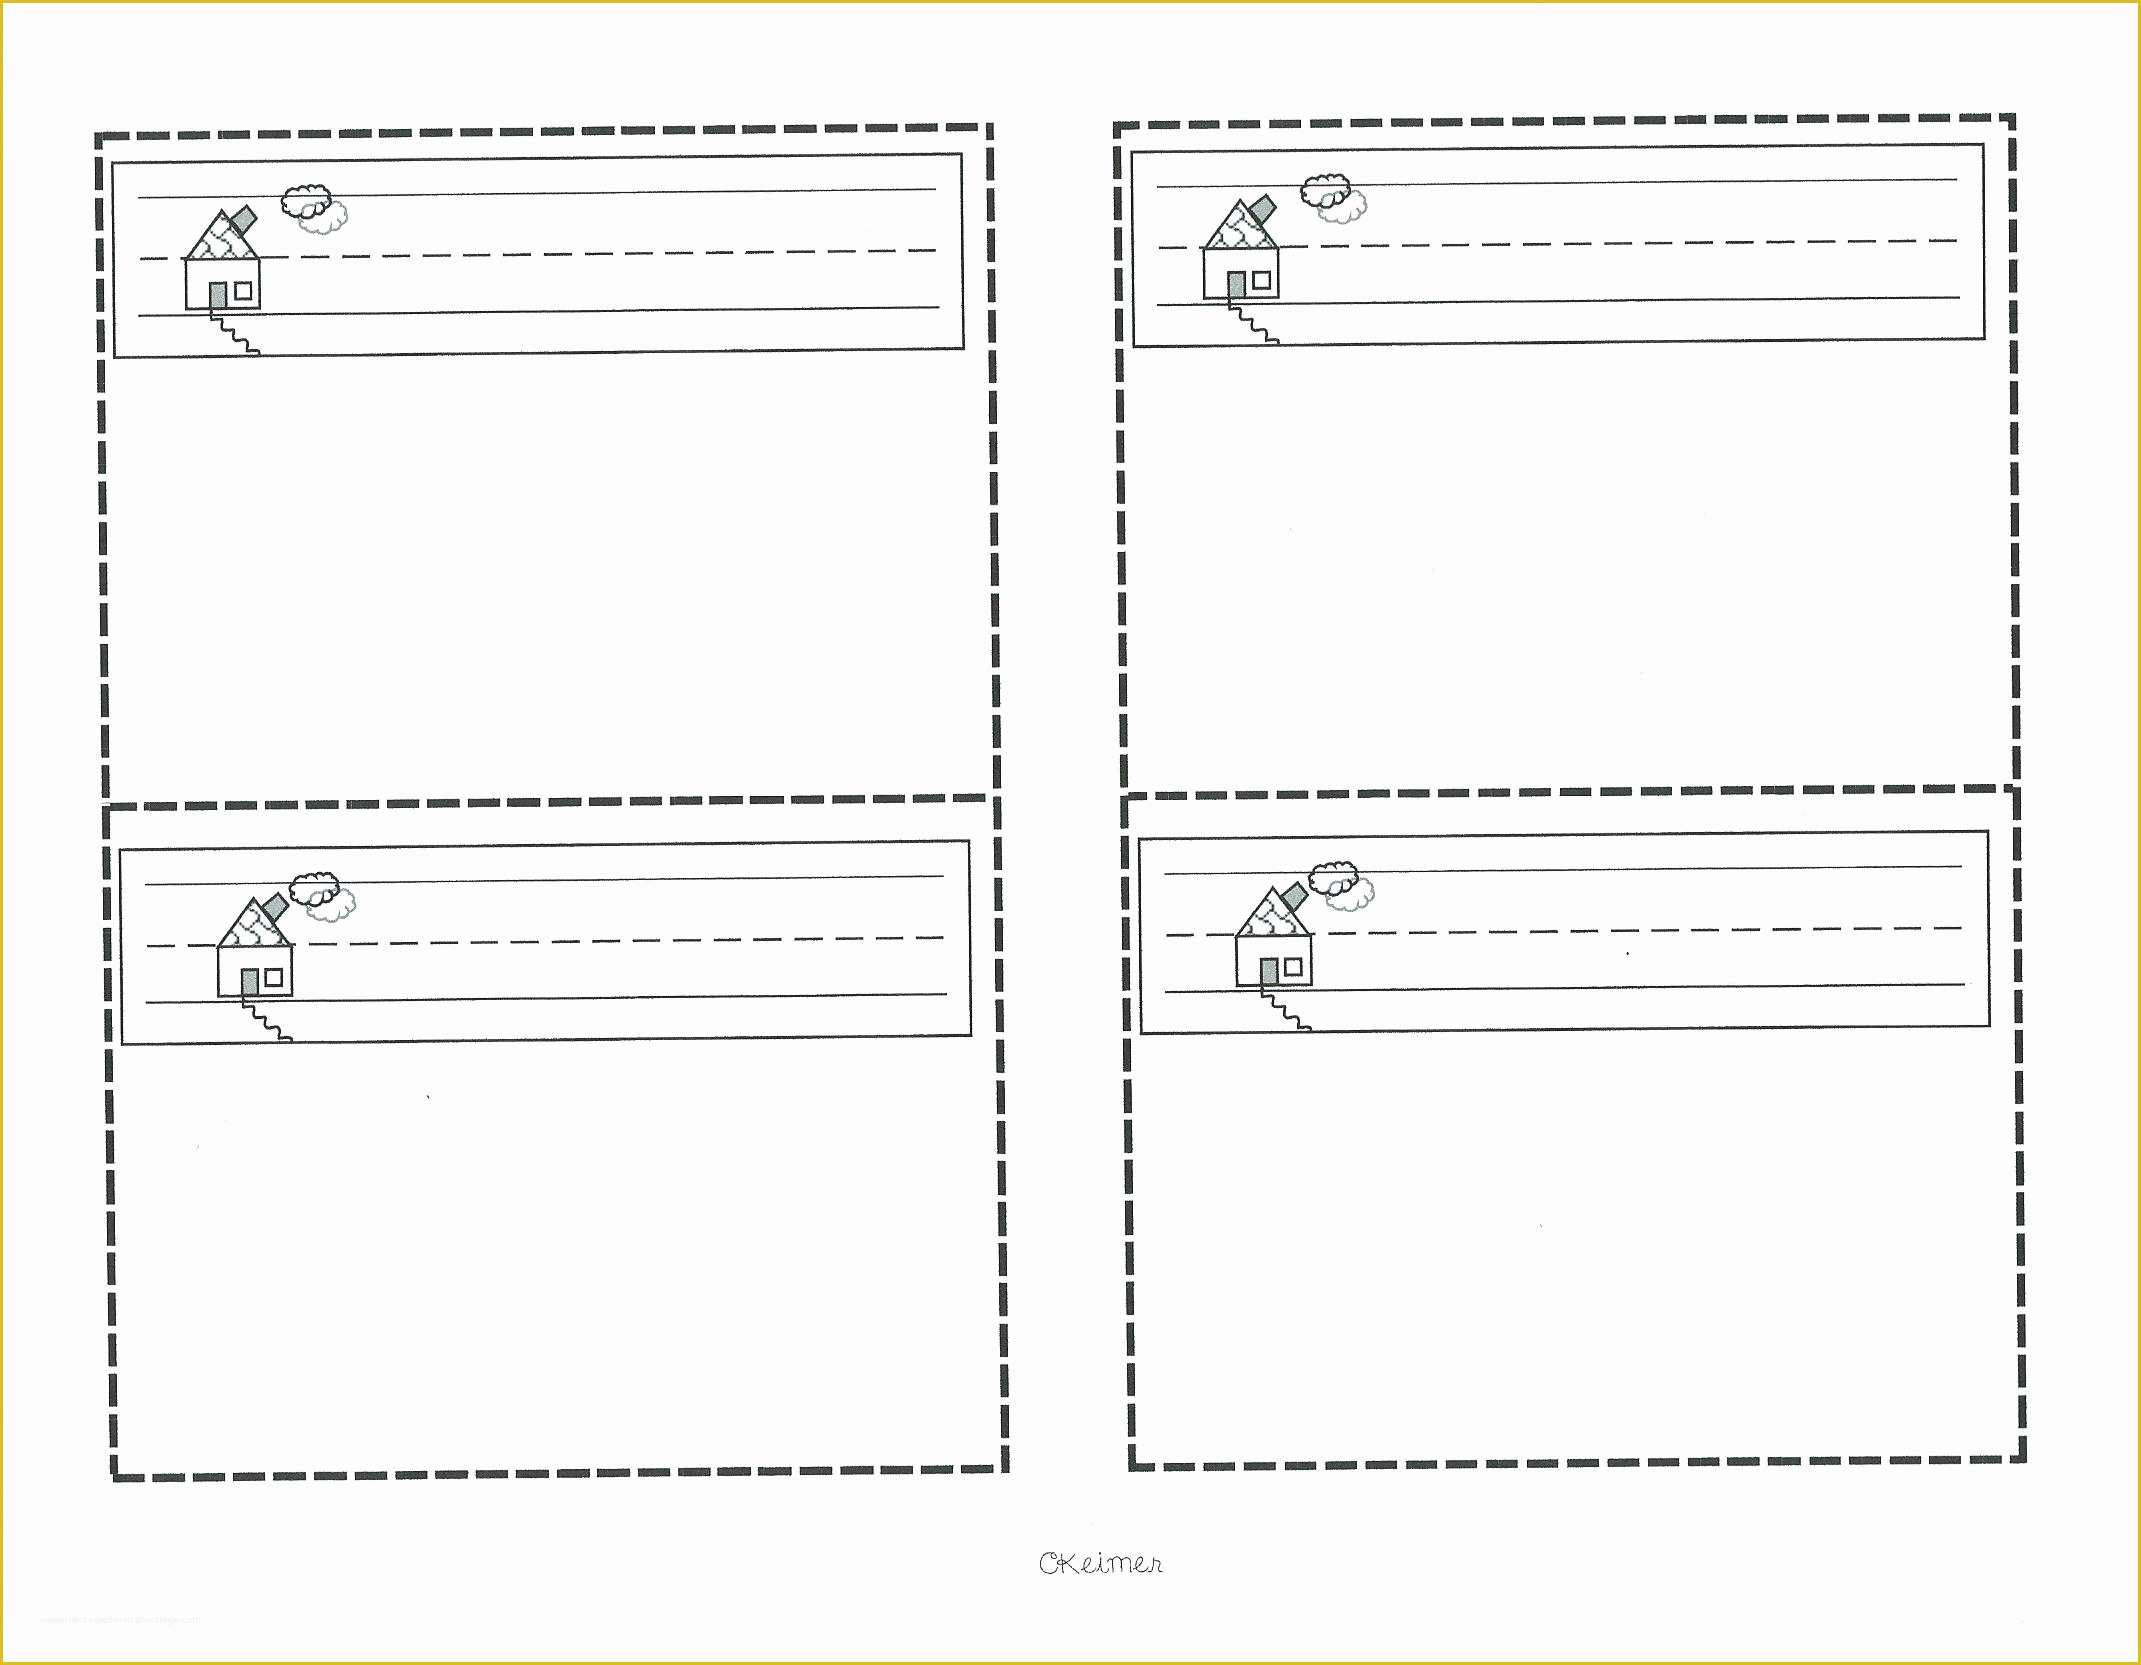 Flashcard Template Free Of Sight Word Flashcards with Visuals – some Divine Intervention